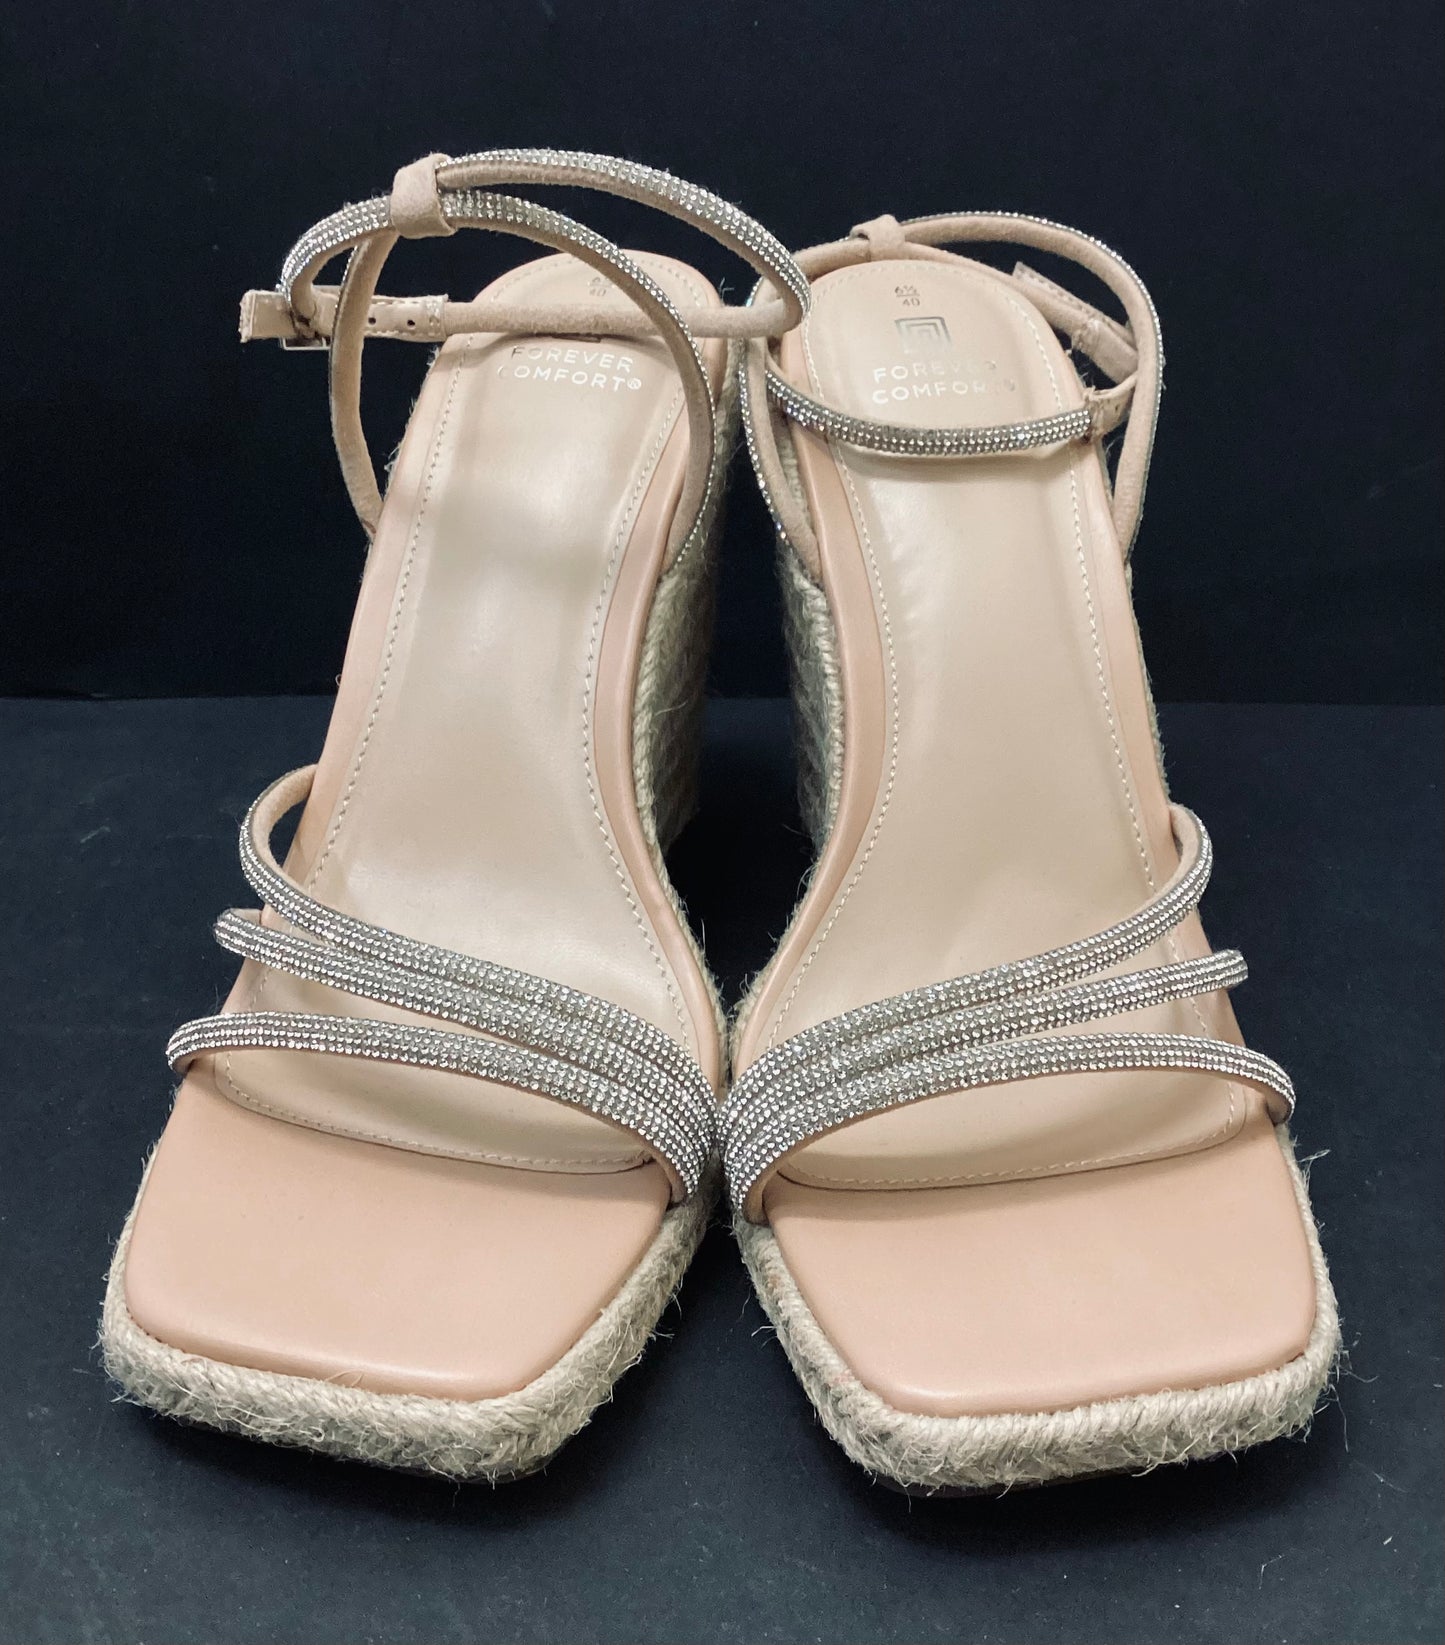 BNWT Next Forever Comfort Wedge Sandals size 6.5